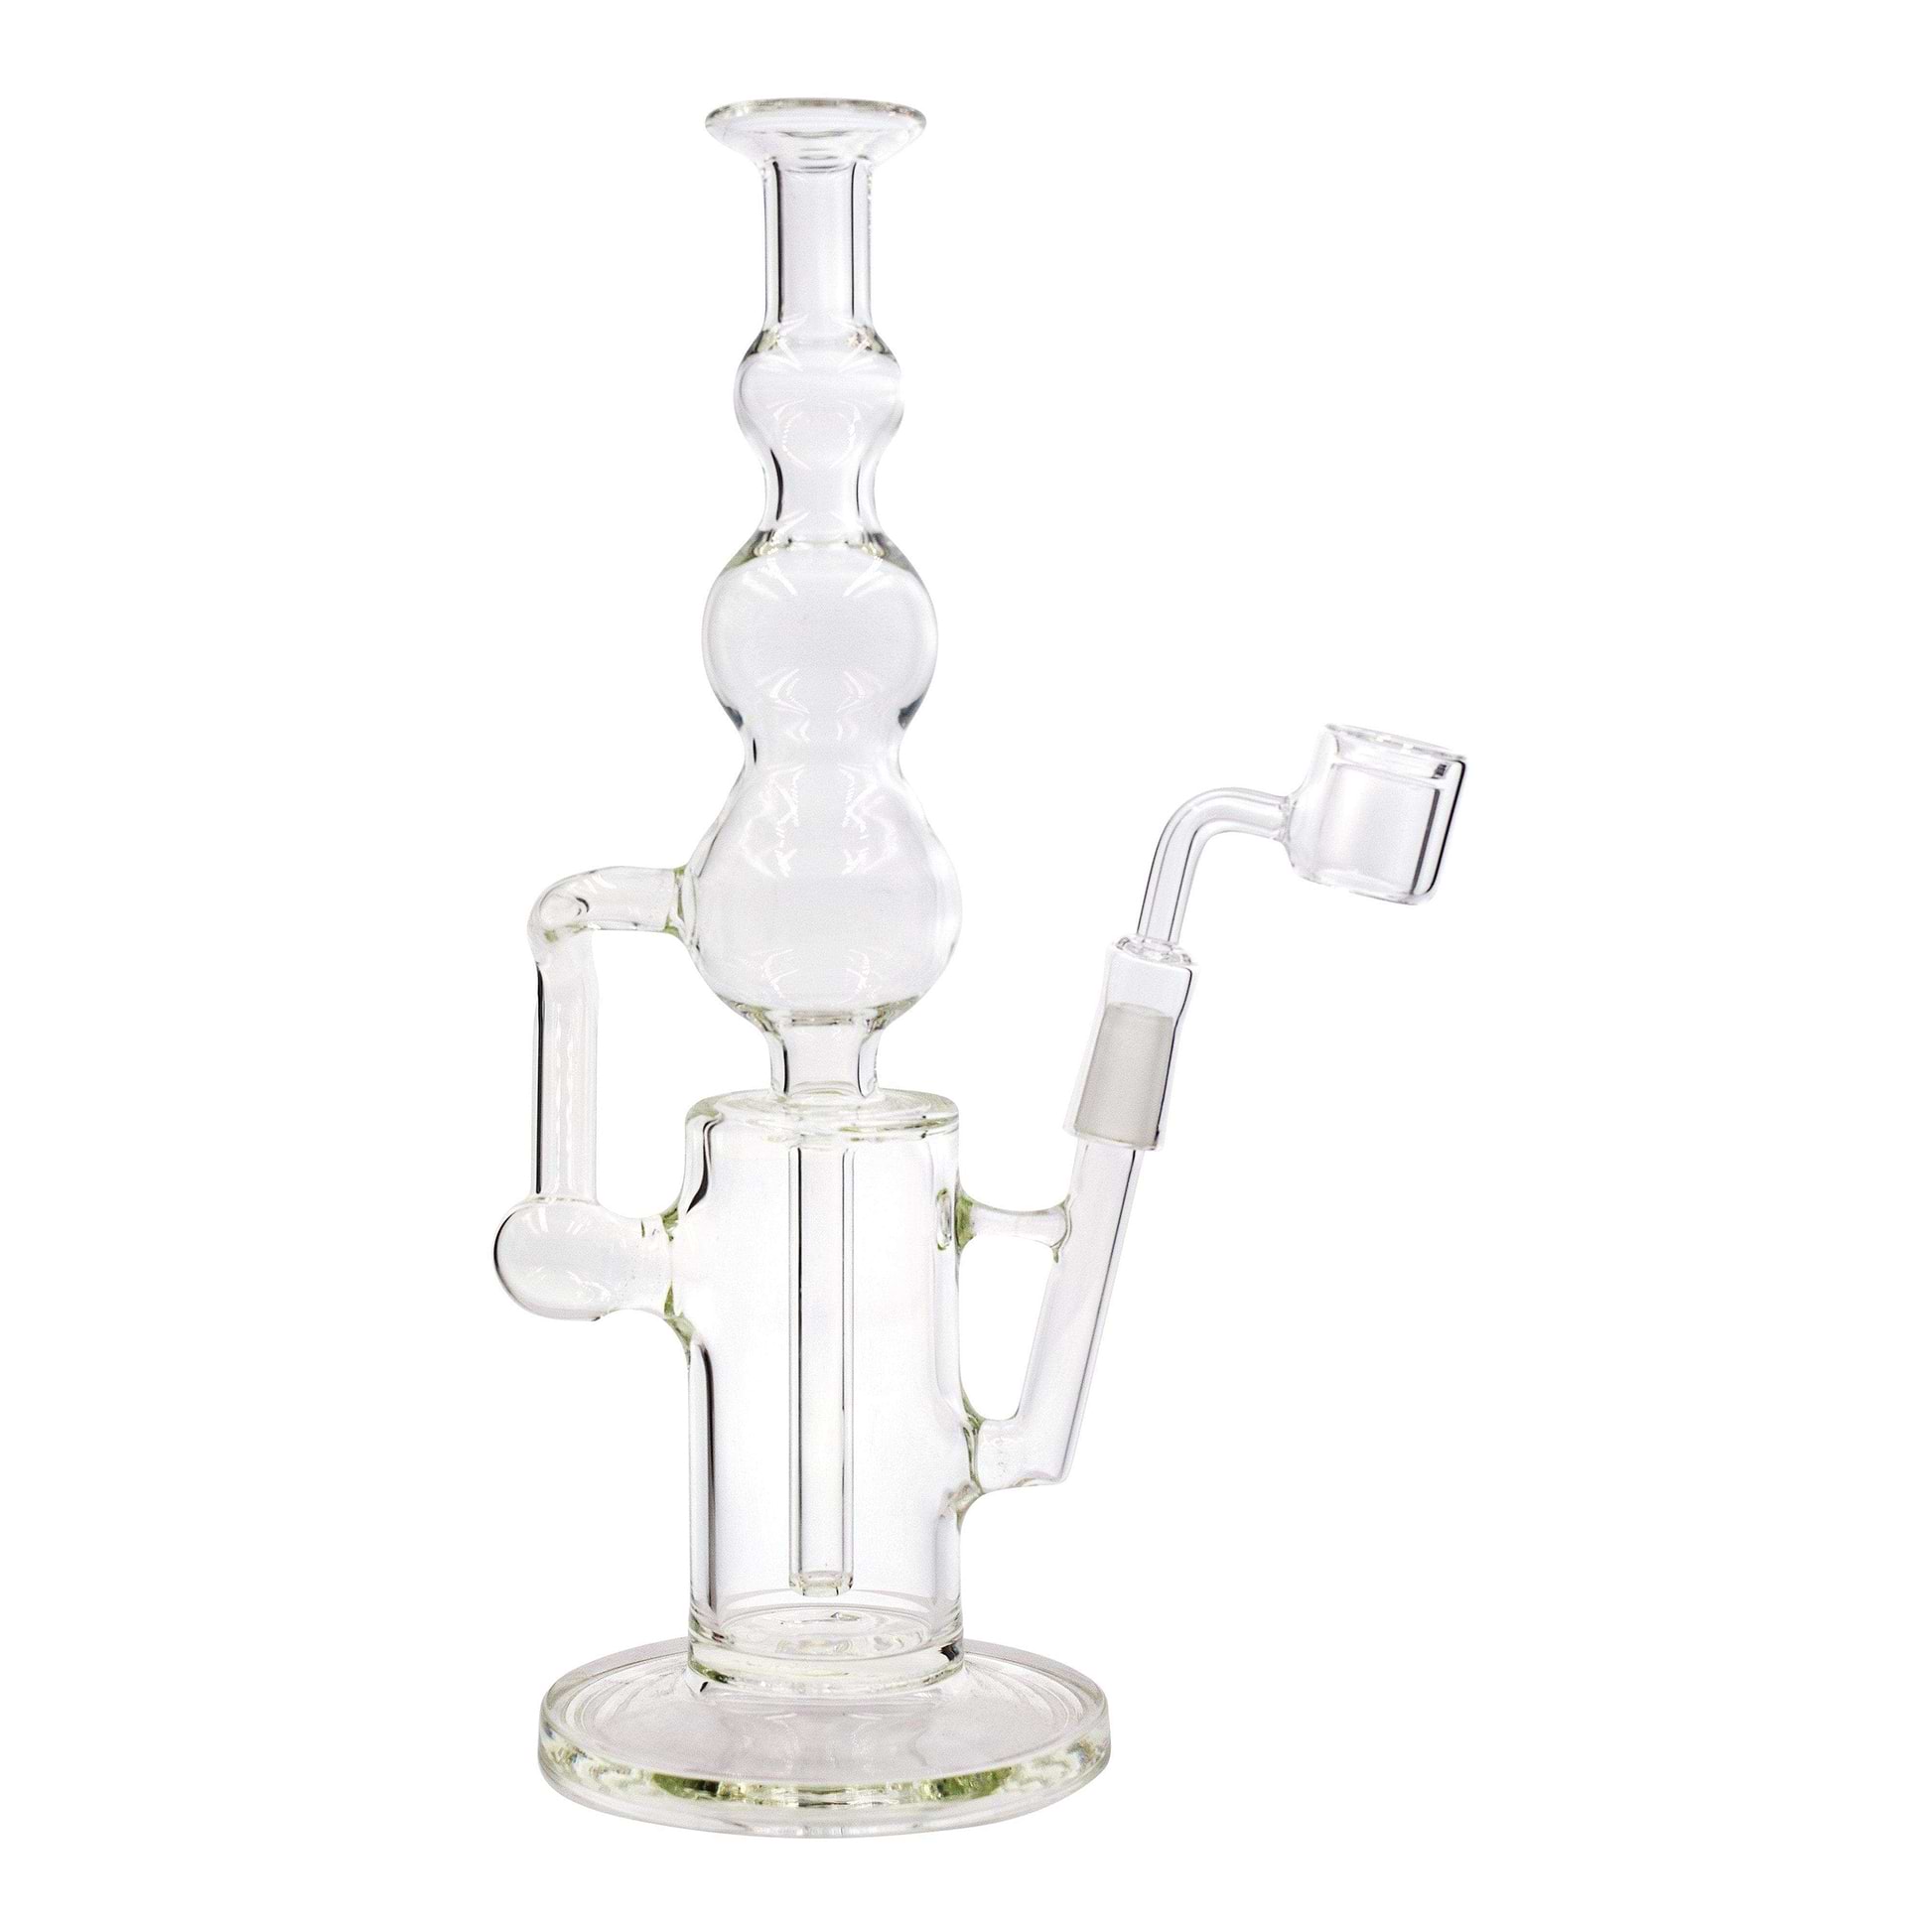 12-inch glass dab rig recycler bong smoking device with genie-in-a-bottle Alladin shape and look